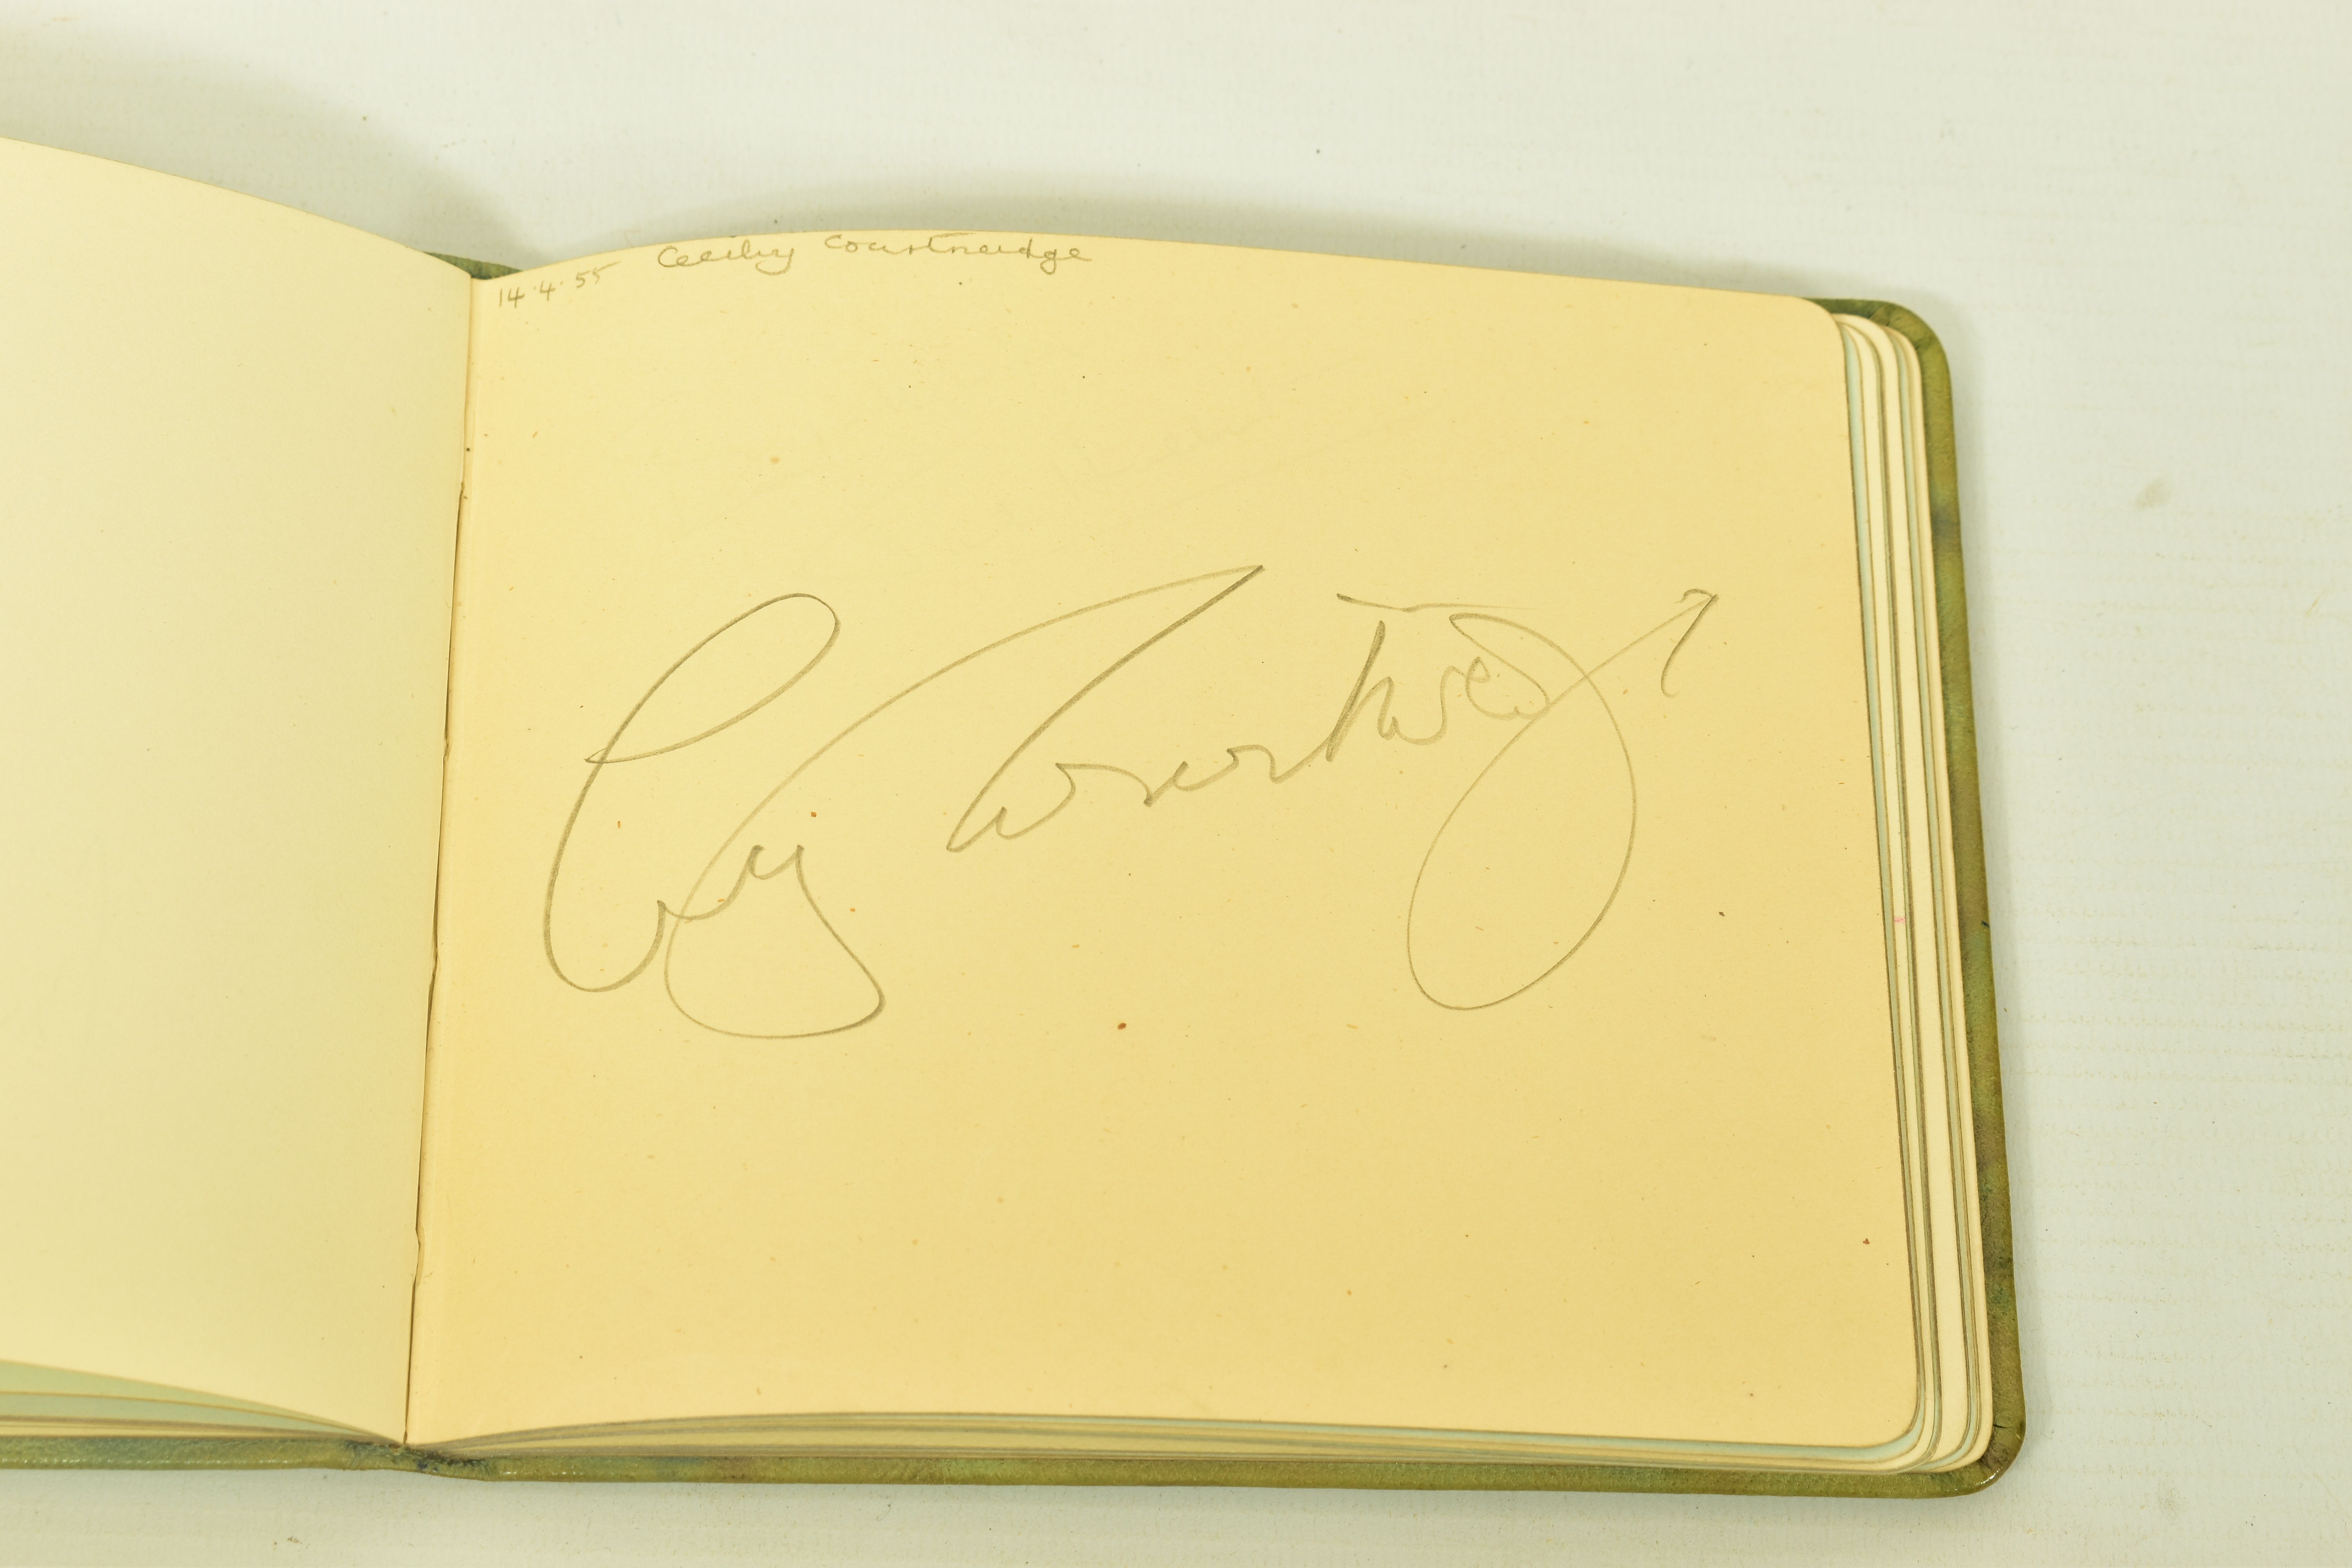 FILM & STAGE AUTOGRAPH ALBUM, a collection of signatures in an autograph album featuring some of the - Image 5 of 12